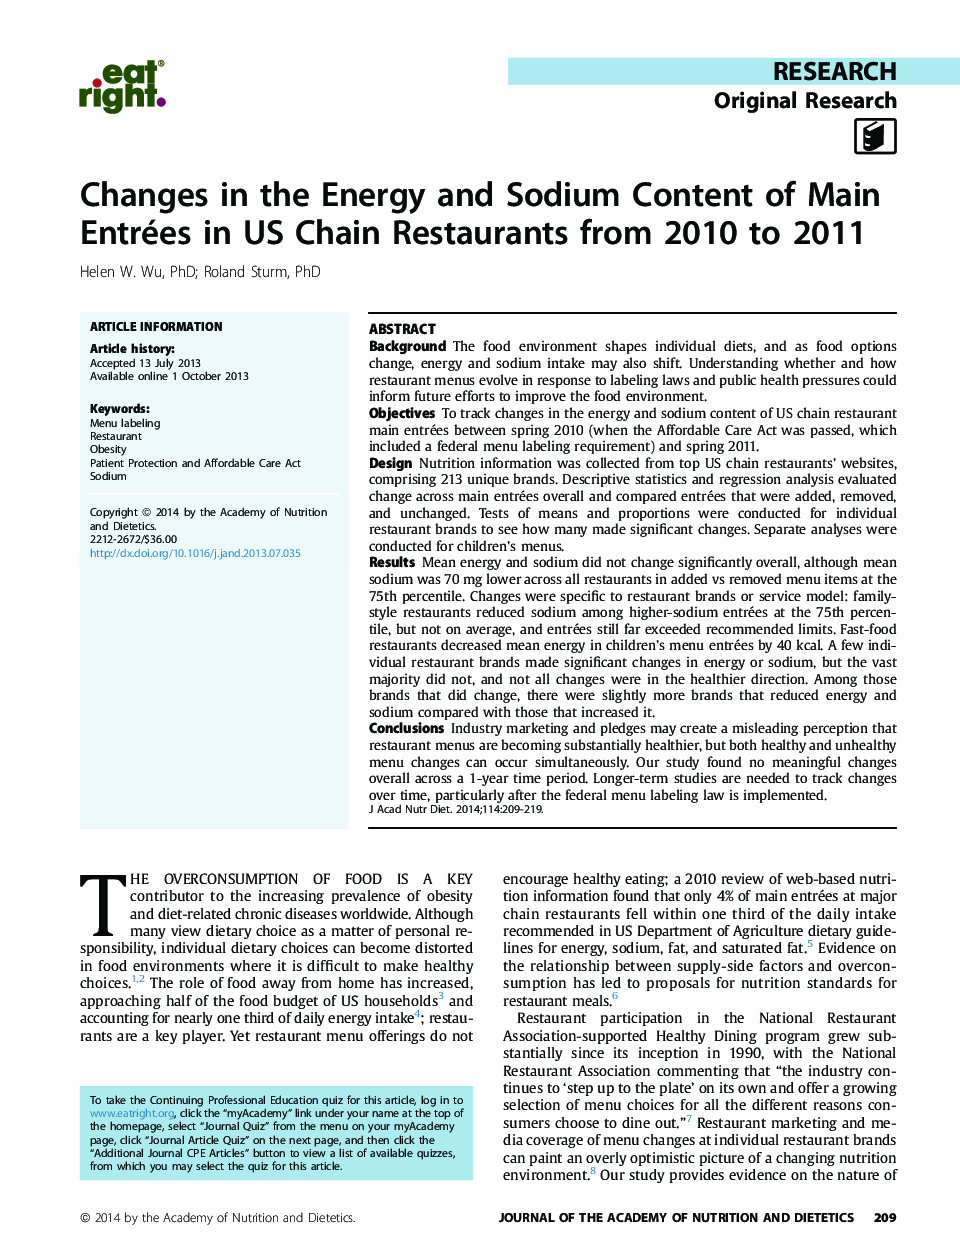 Changes in the Energy and Sodium Content of Main Entrées in US Chain Restaurants from 2010 to 2011